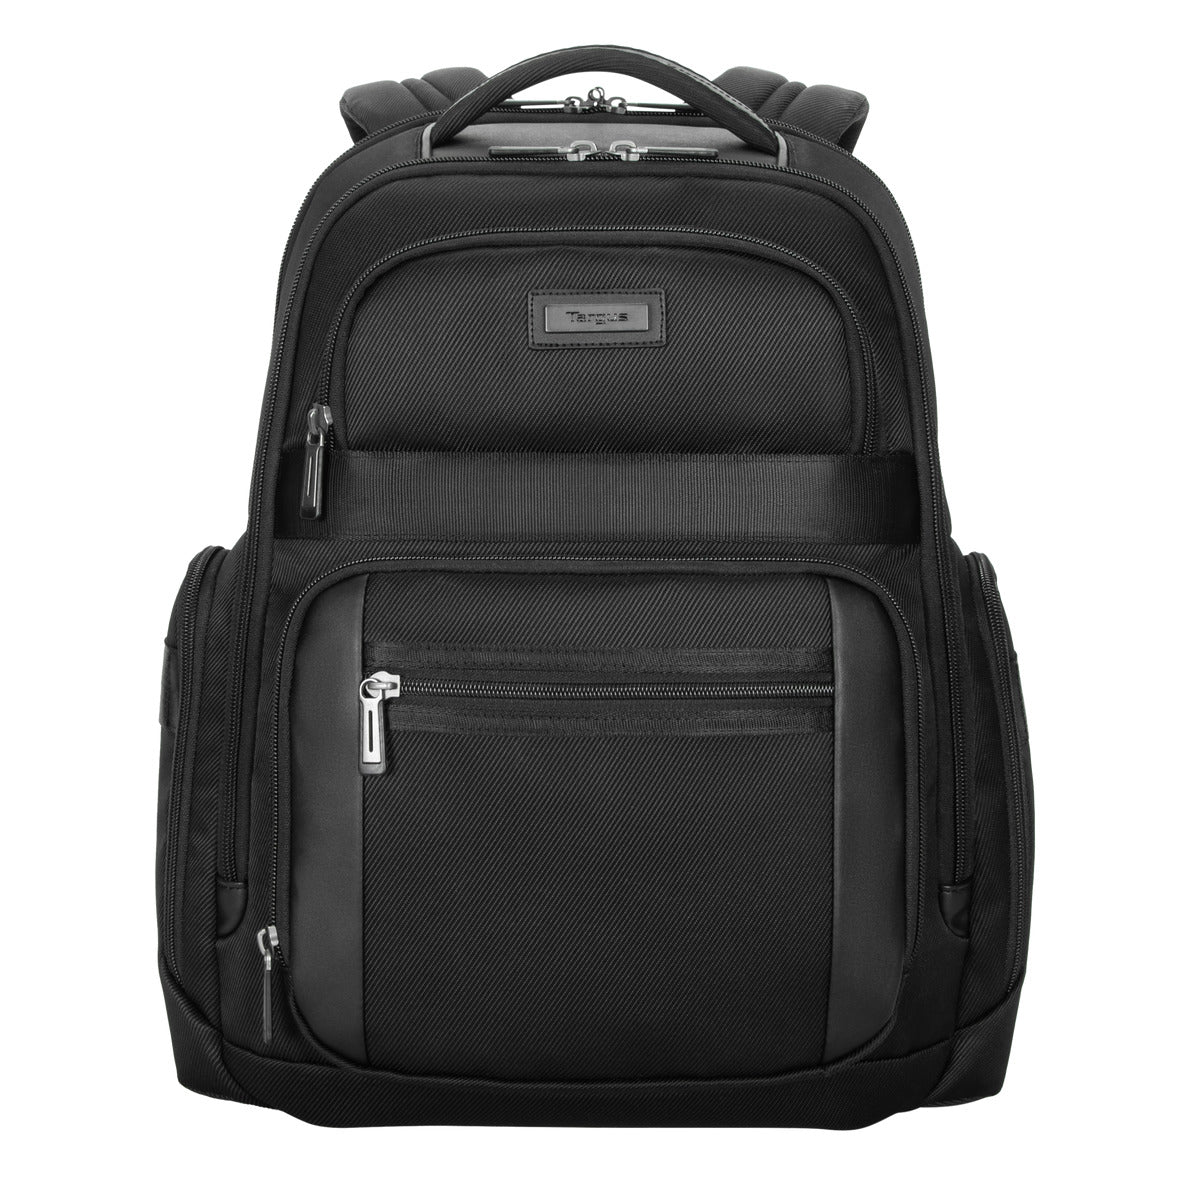 Checkpoint-Friendly Laptop Bags